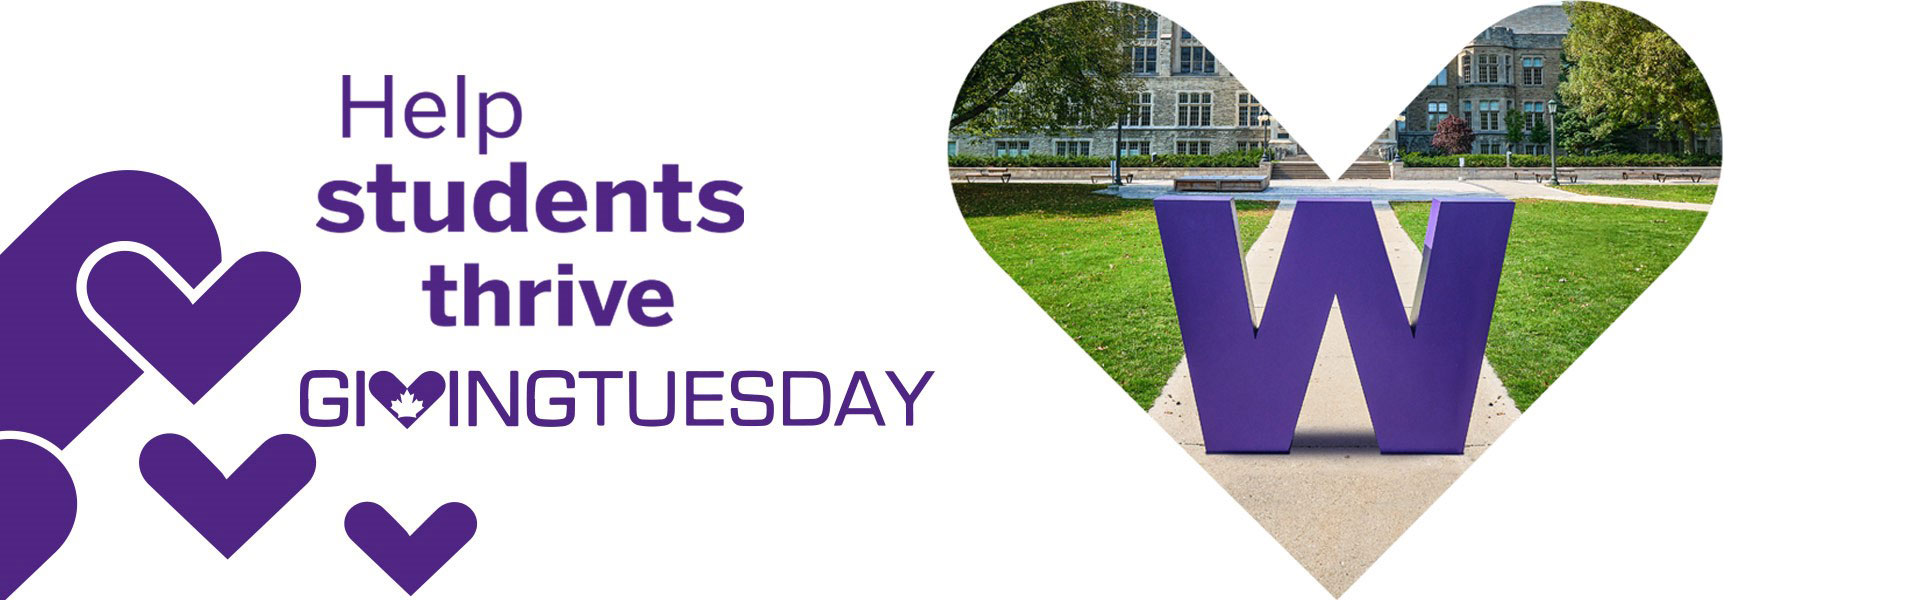 Help Students Thrive - GIving Tuesday